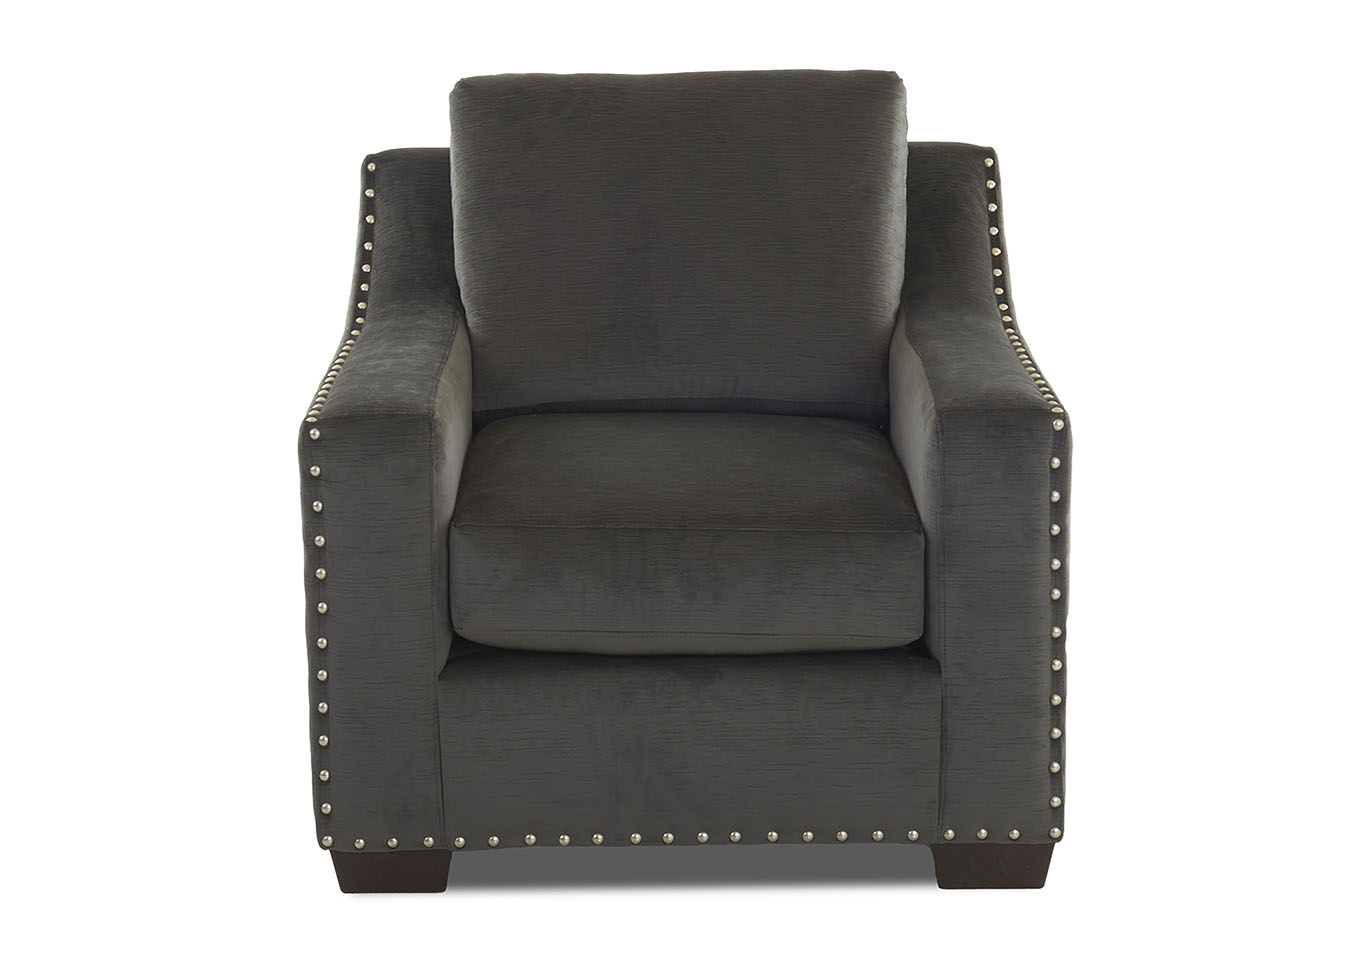 Argos Empire Charcoal Stationary Fabric Chair,Klaussner Home Furnishings